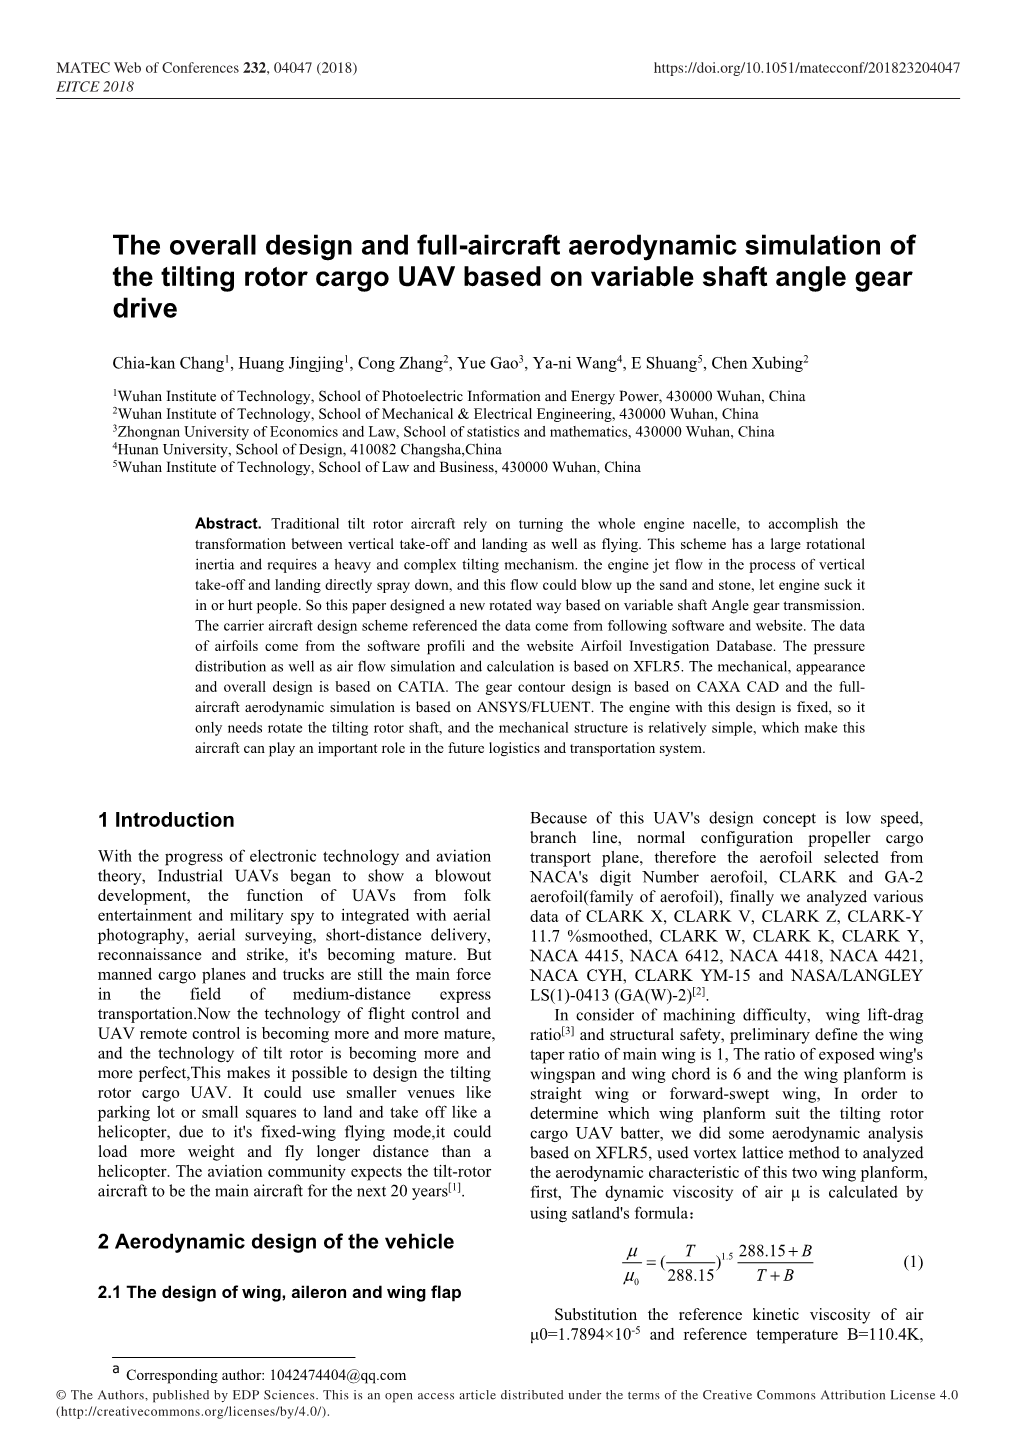 The Overall Design and Full-Aircraft Aerodynamic Simulation of the Tilting Rotor Cargo UAV Based on Variable Shaft Angle Gear Drive